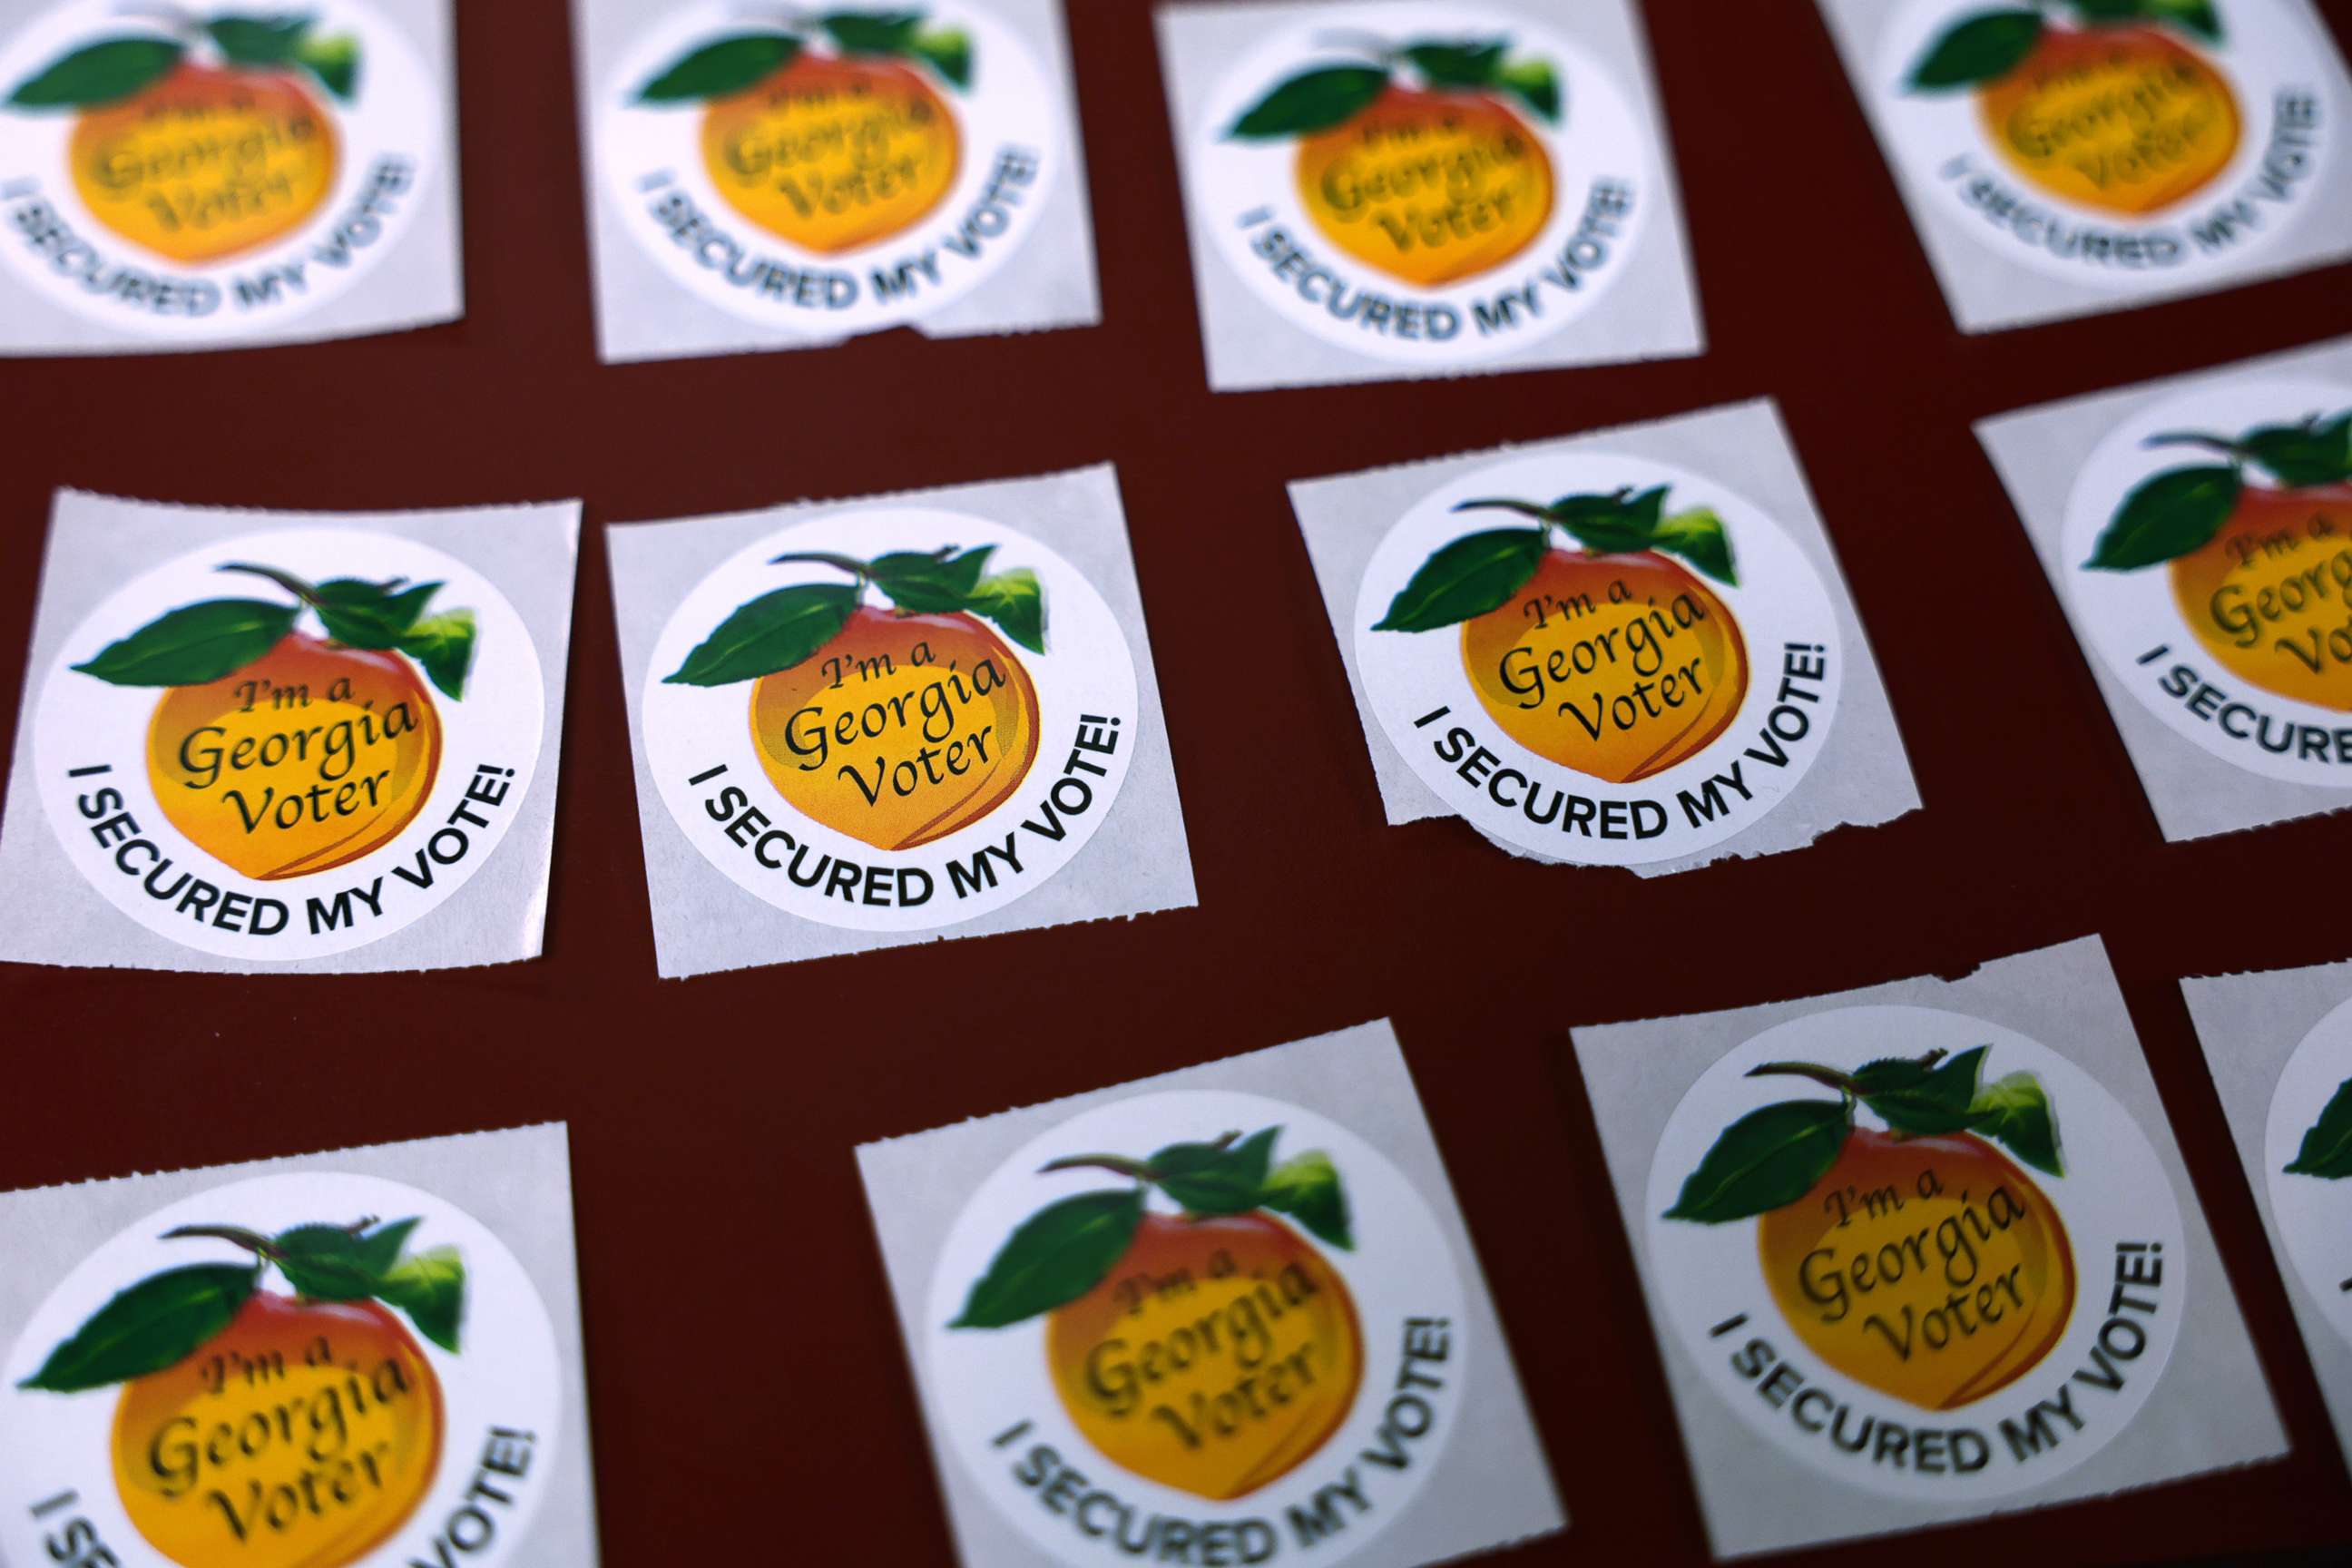 PHOTO: A few "I'm a Georgia Voter, I Secured My Vote!" stickers are seen at a polling place, Nov. 8, 2022 in Sandy Springs, Ga.